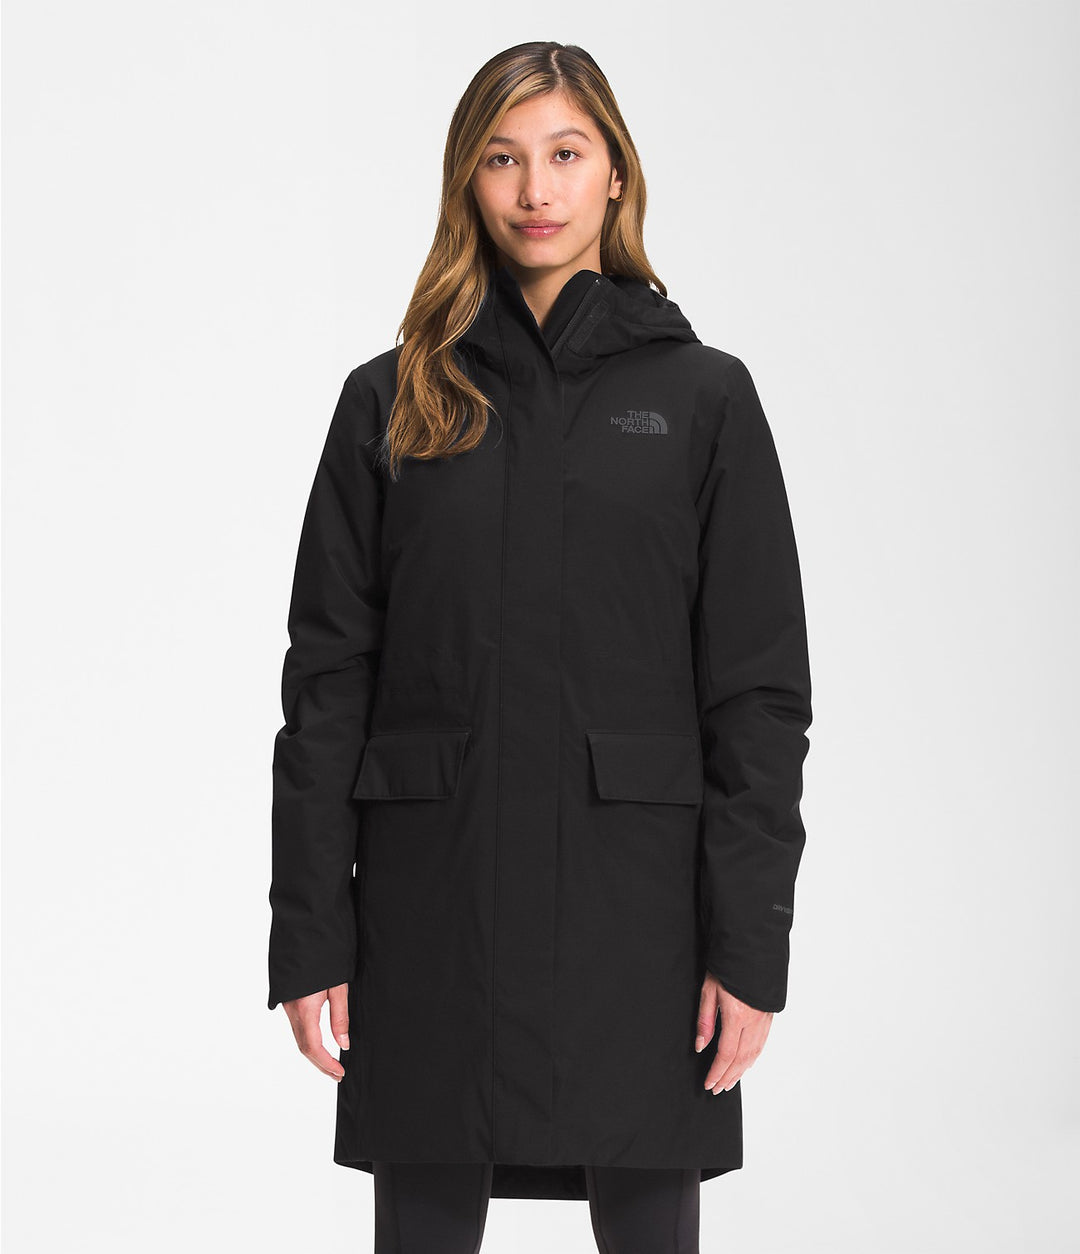 North Face Women's City Breeze Insulated Parka